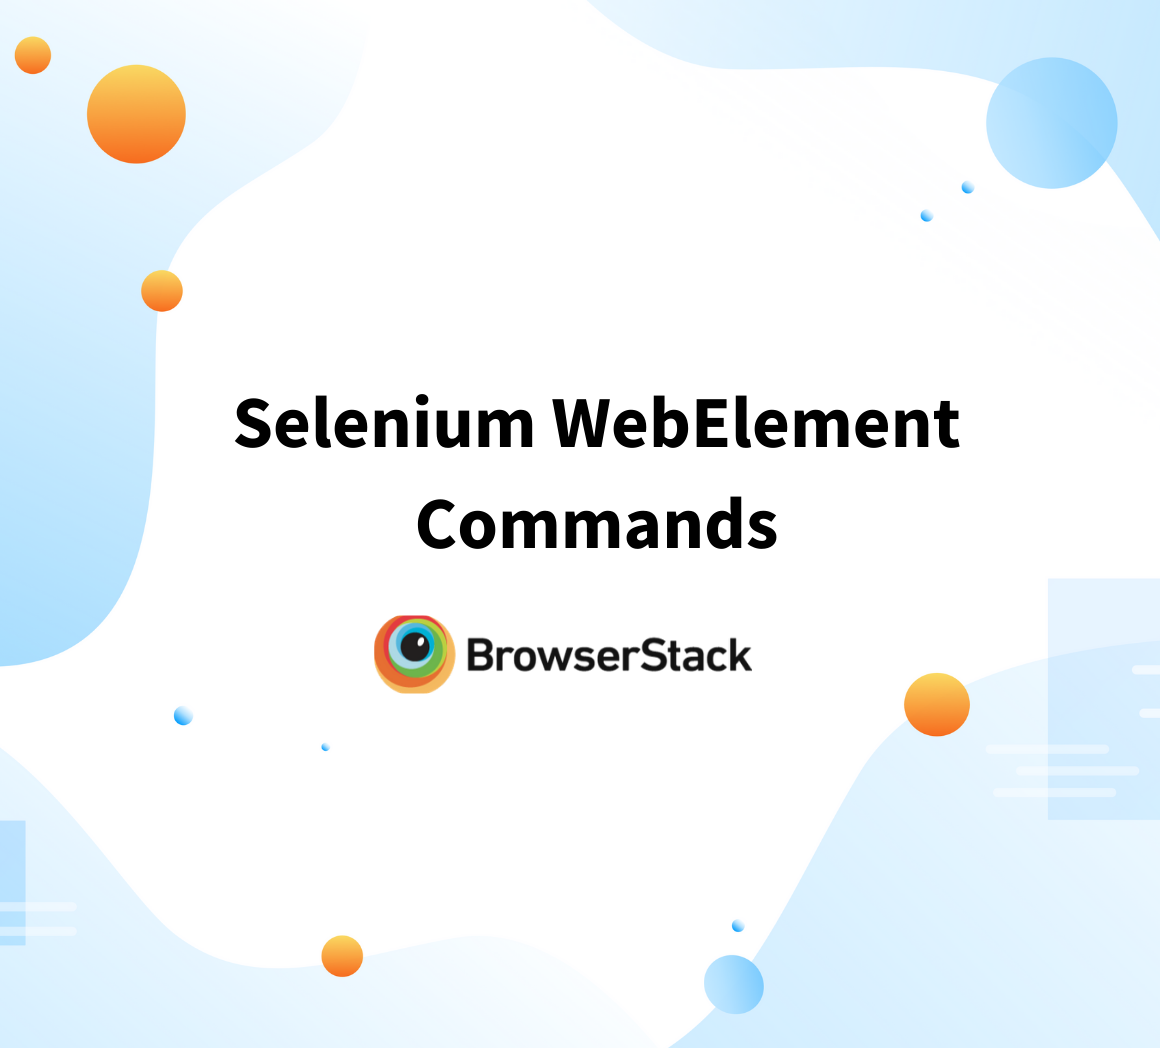 How to use WebElement commands in Selenium